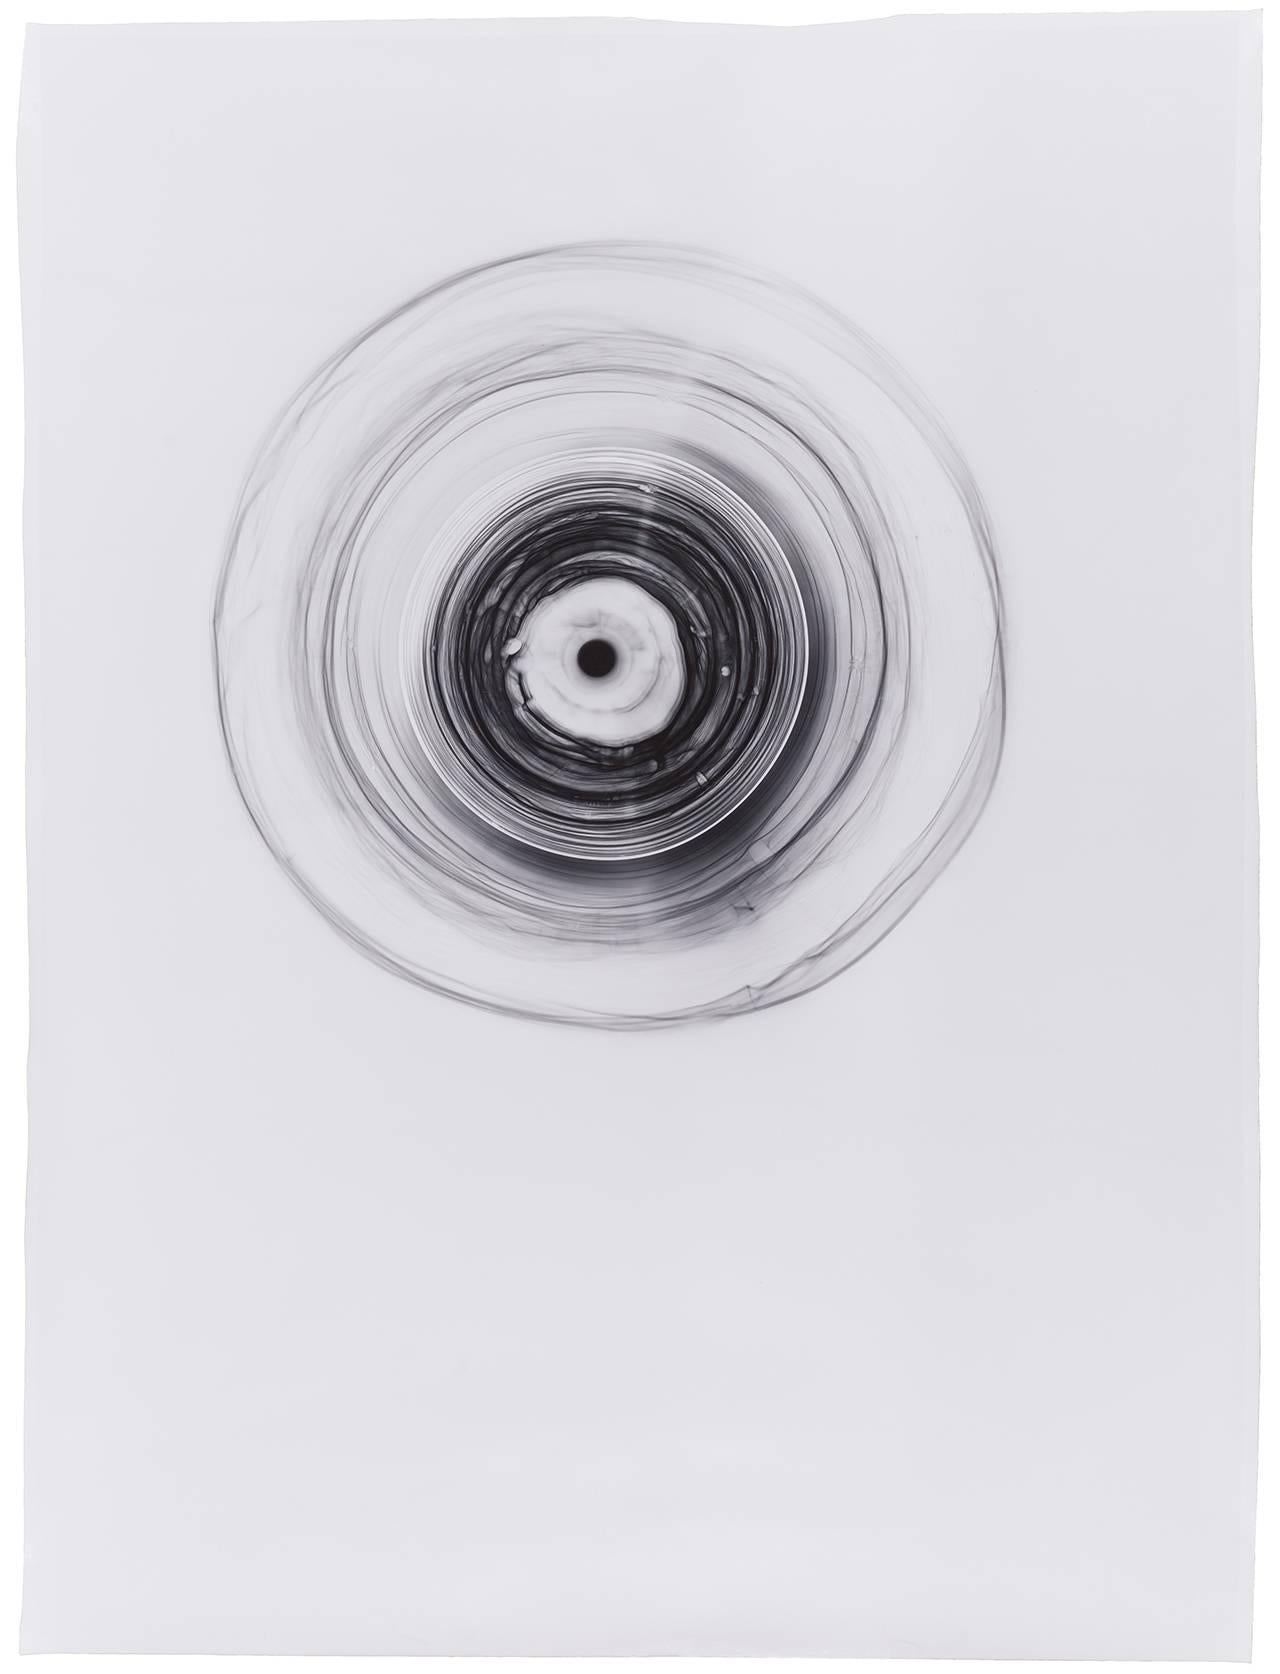 Anne Arden McDonald Black and White Photograph - Saturn (Abstract Camera-less Still Life Photograph in Black & White, Framed) 